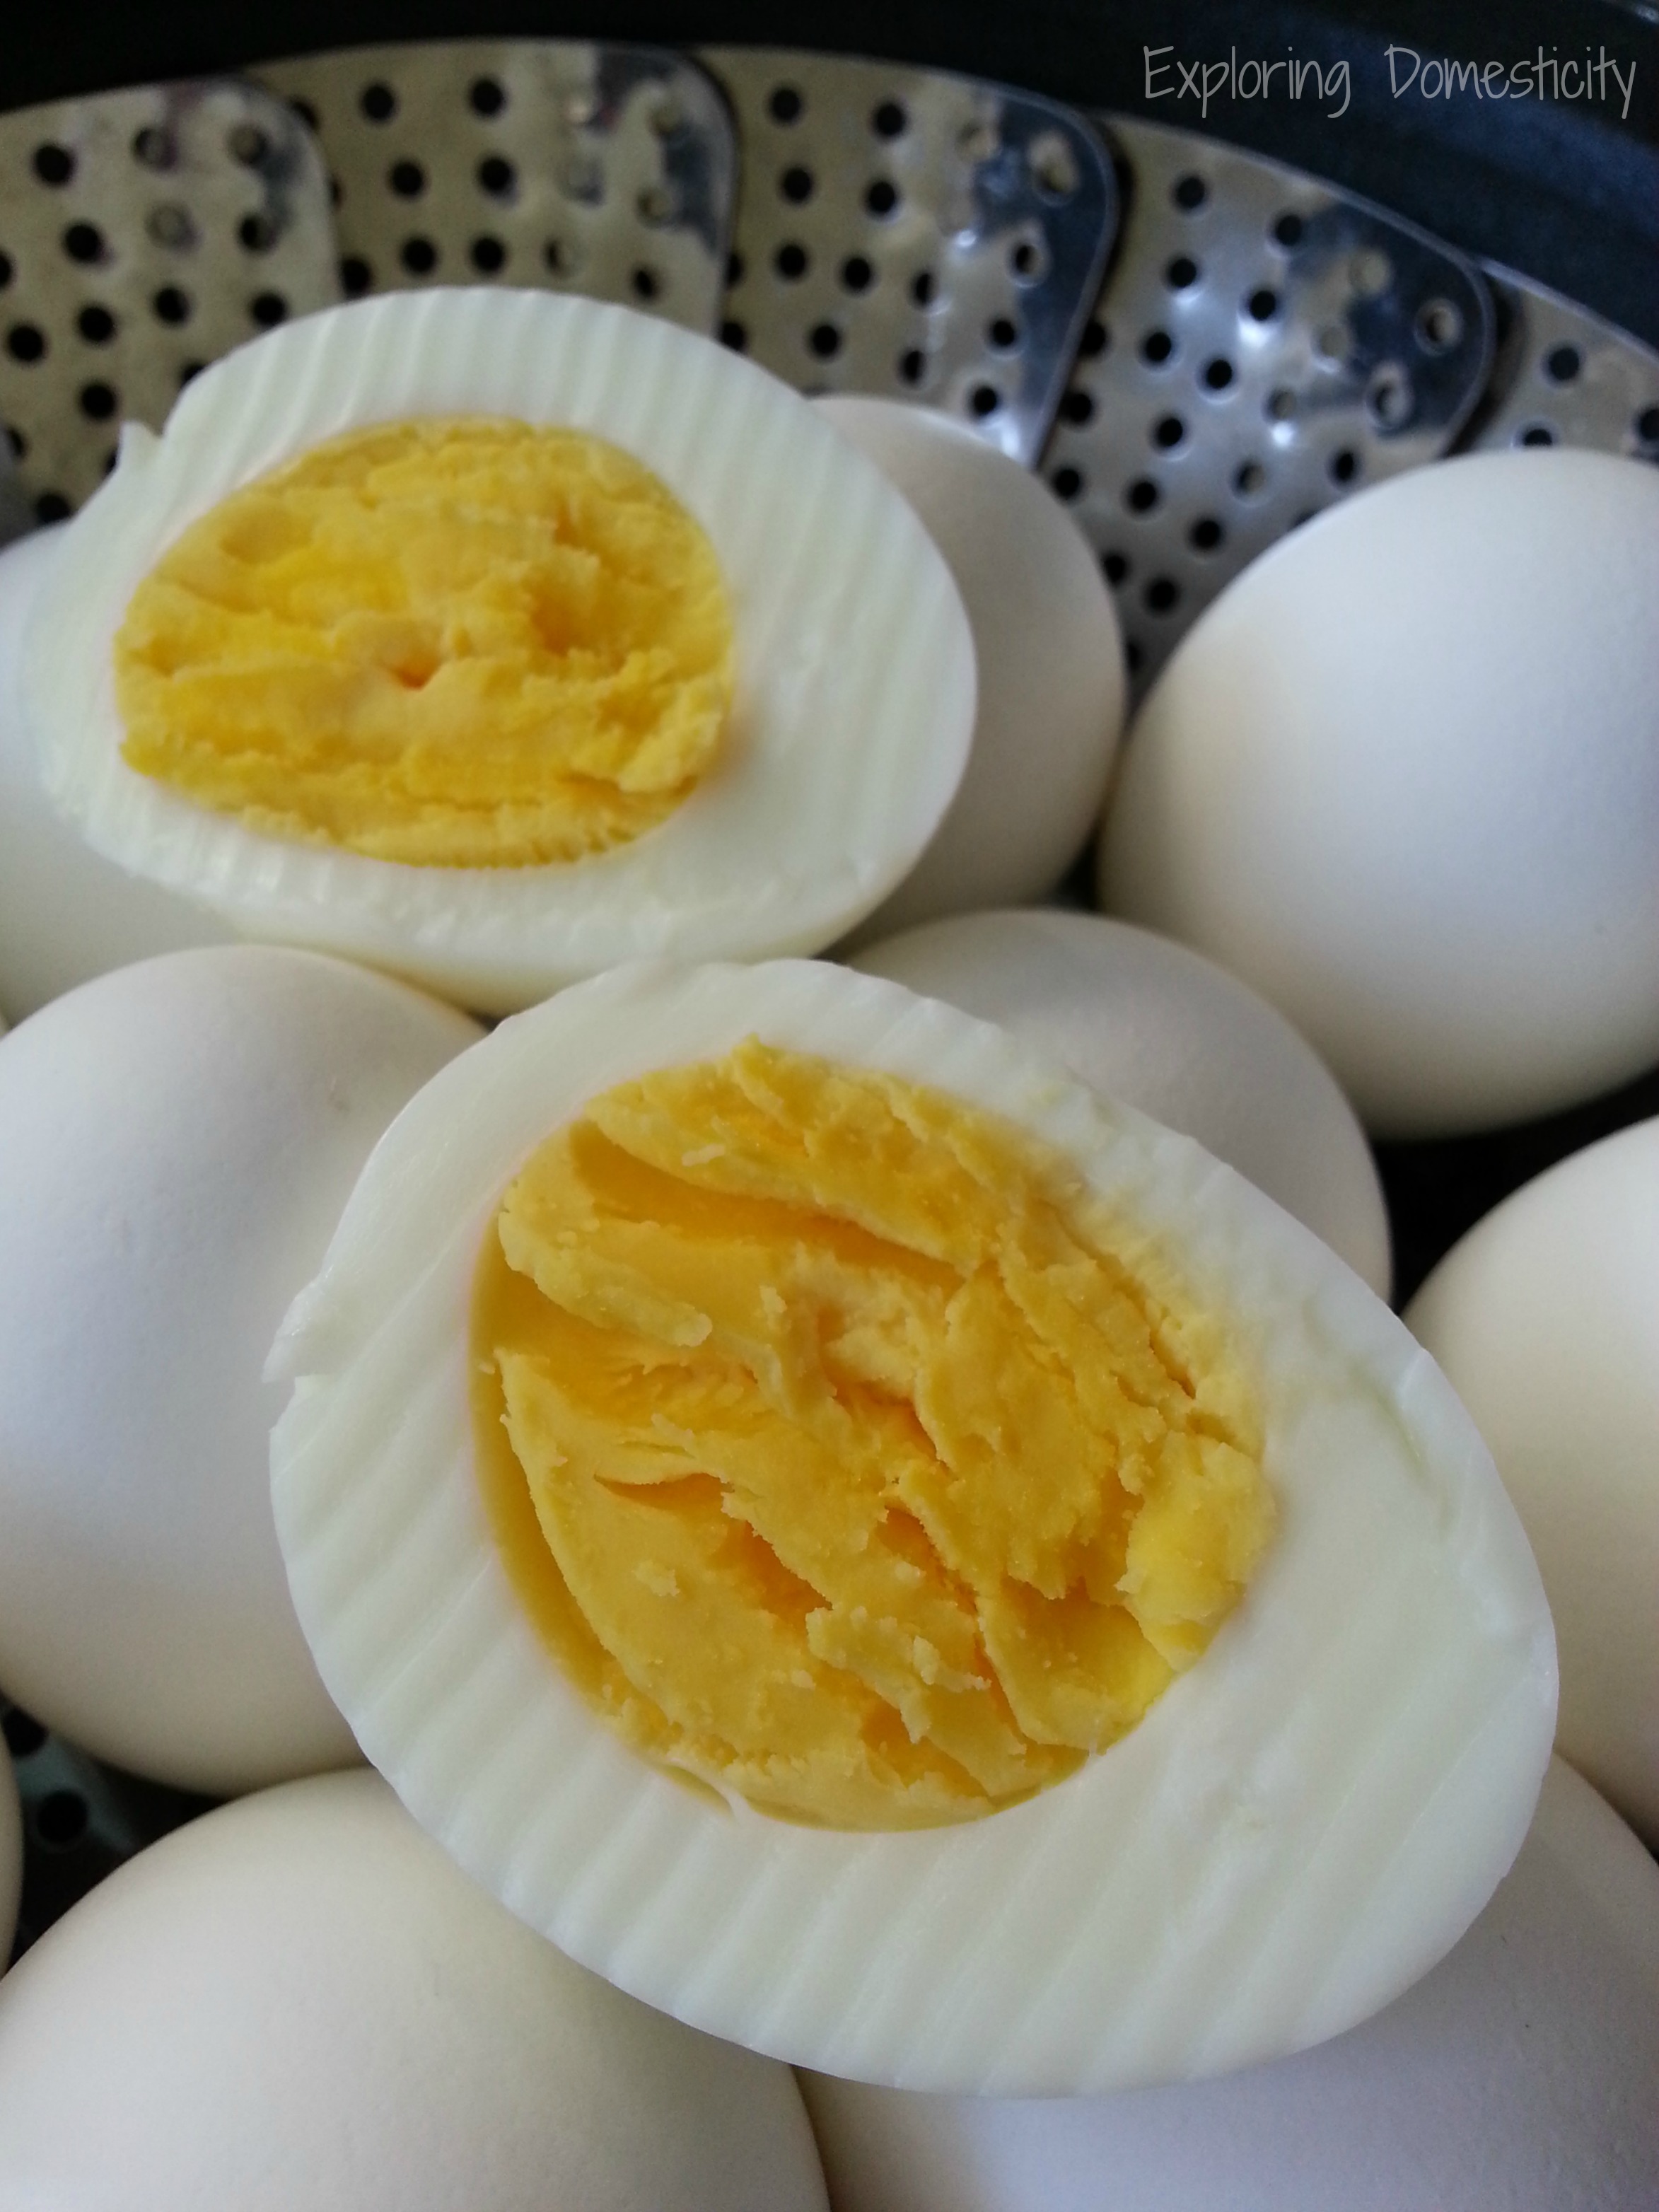 Easy to Peel Perfect HardBoiled Eggs ⋆ Exploring Domesticity